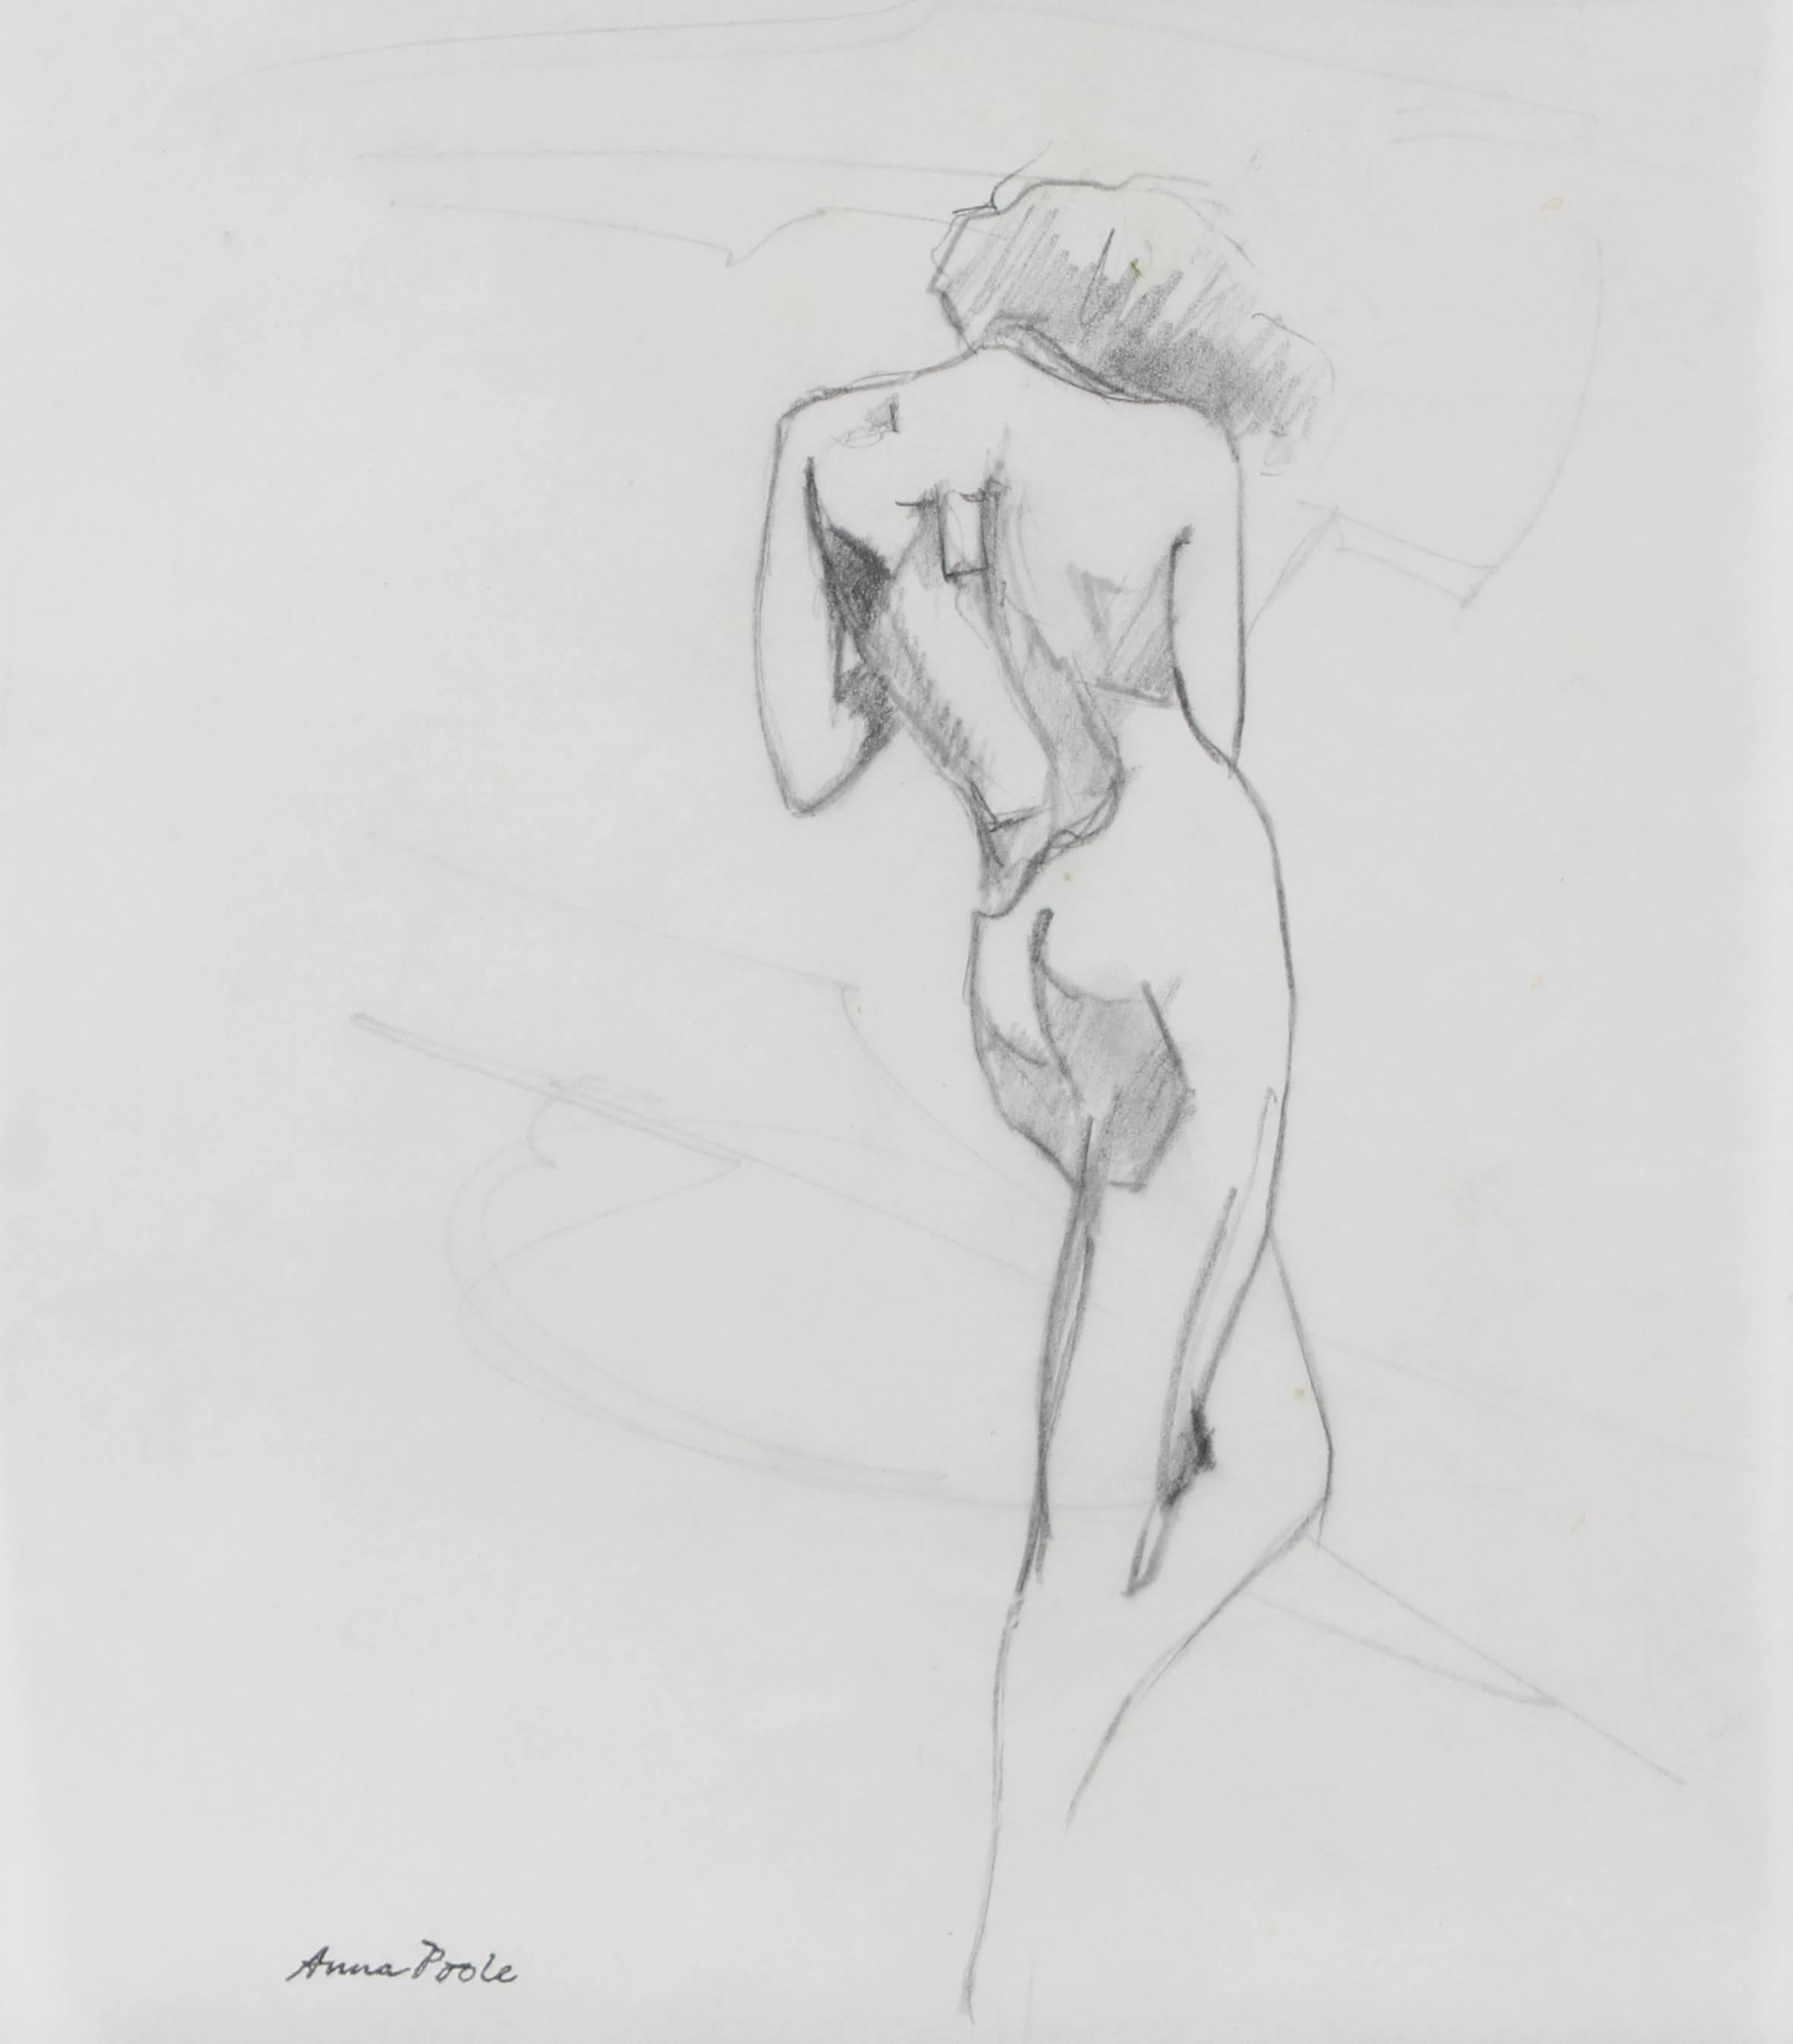 Monochromatic Standing Nude Female Figure Drawing in Graphite, Late 20th Century - Art by Anna Poole